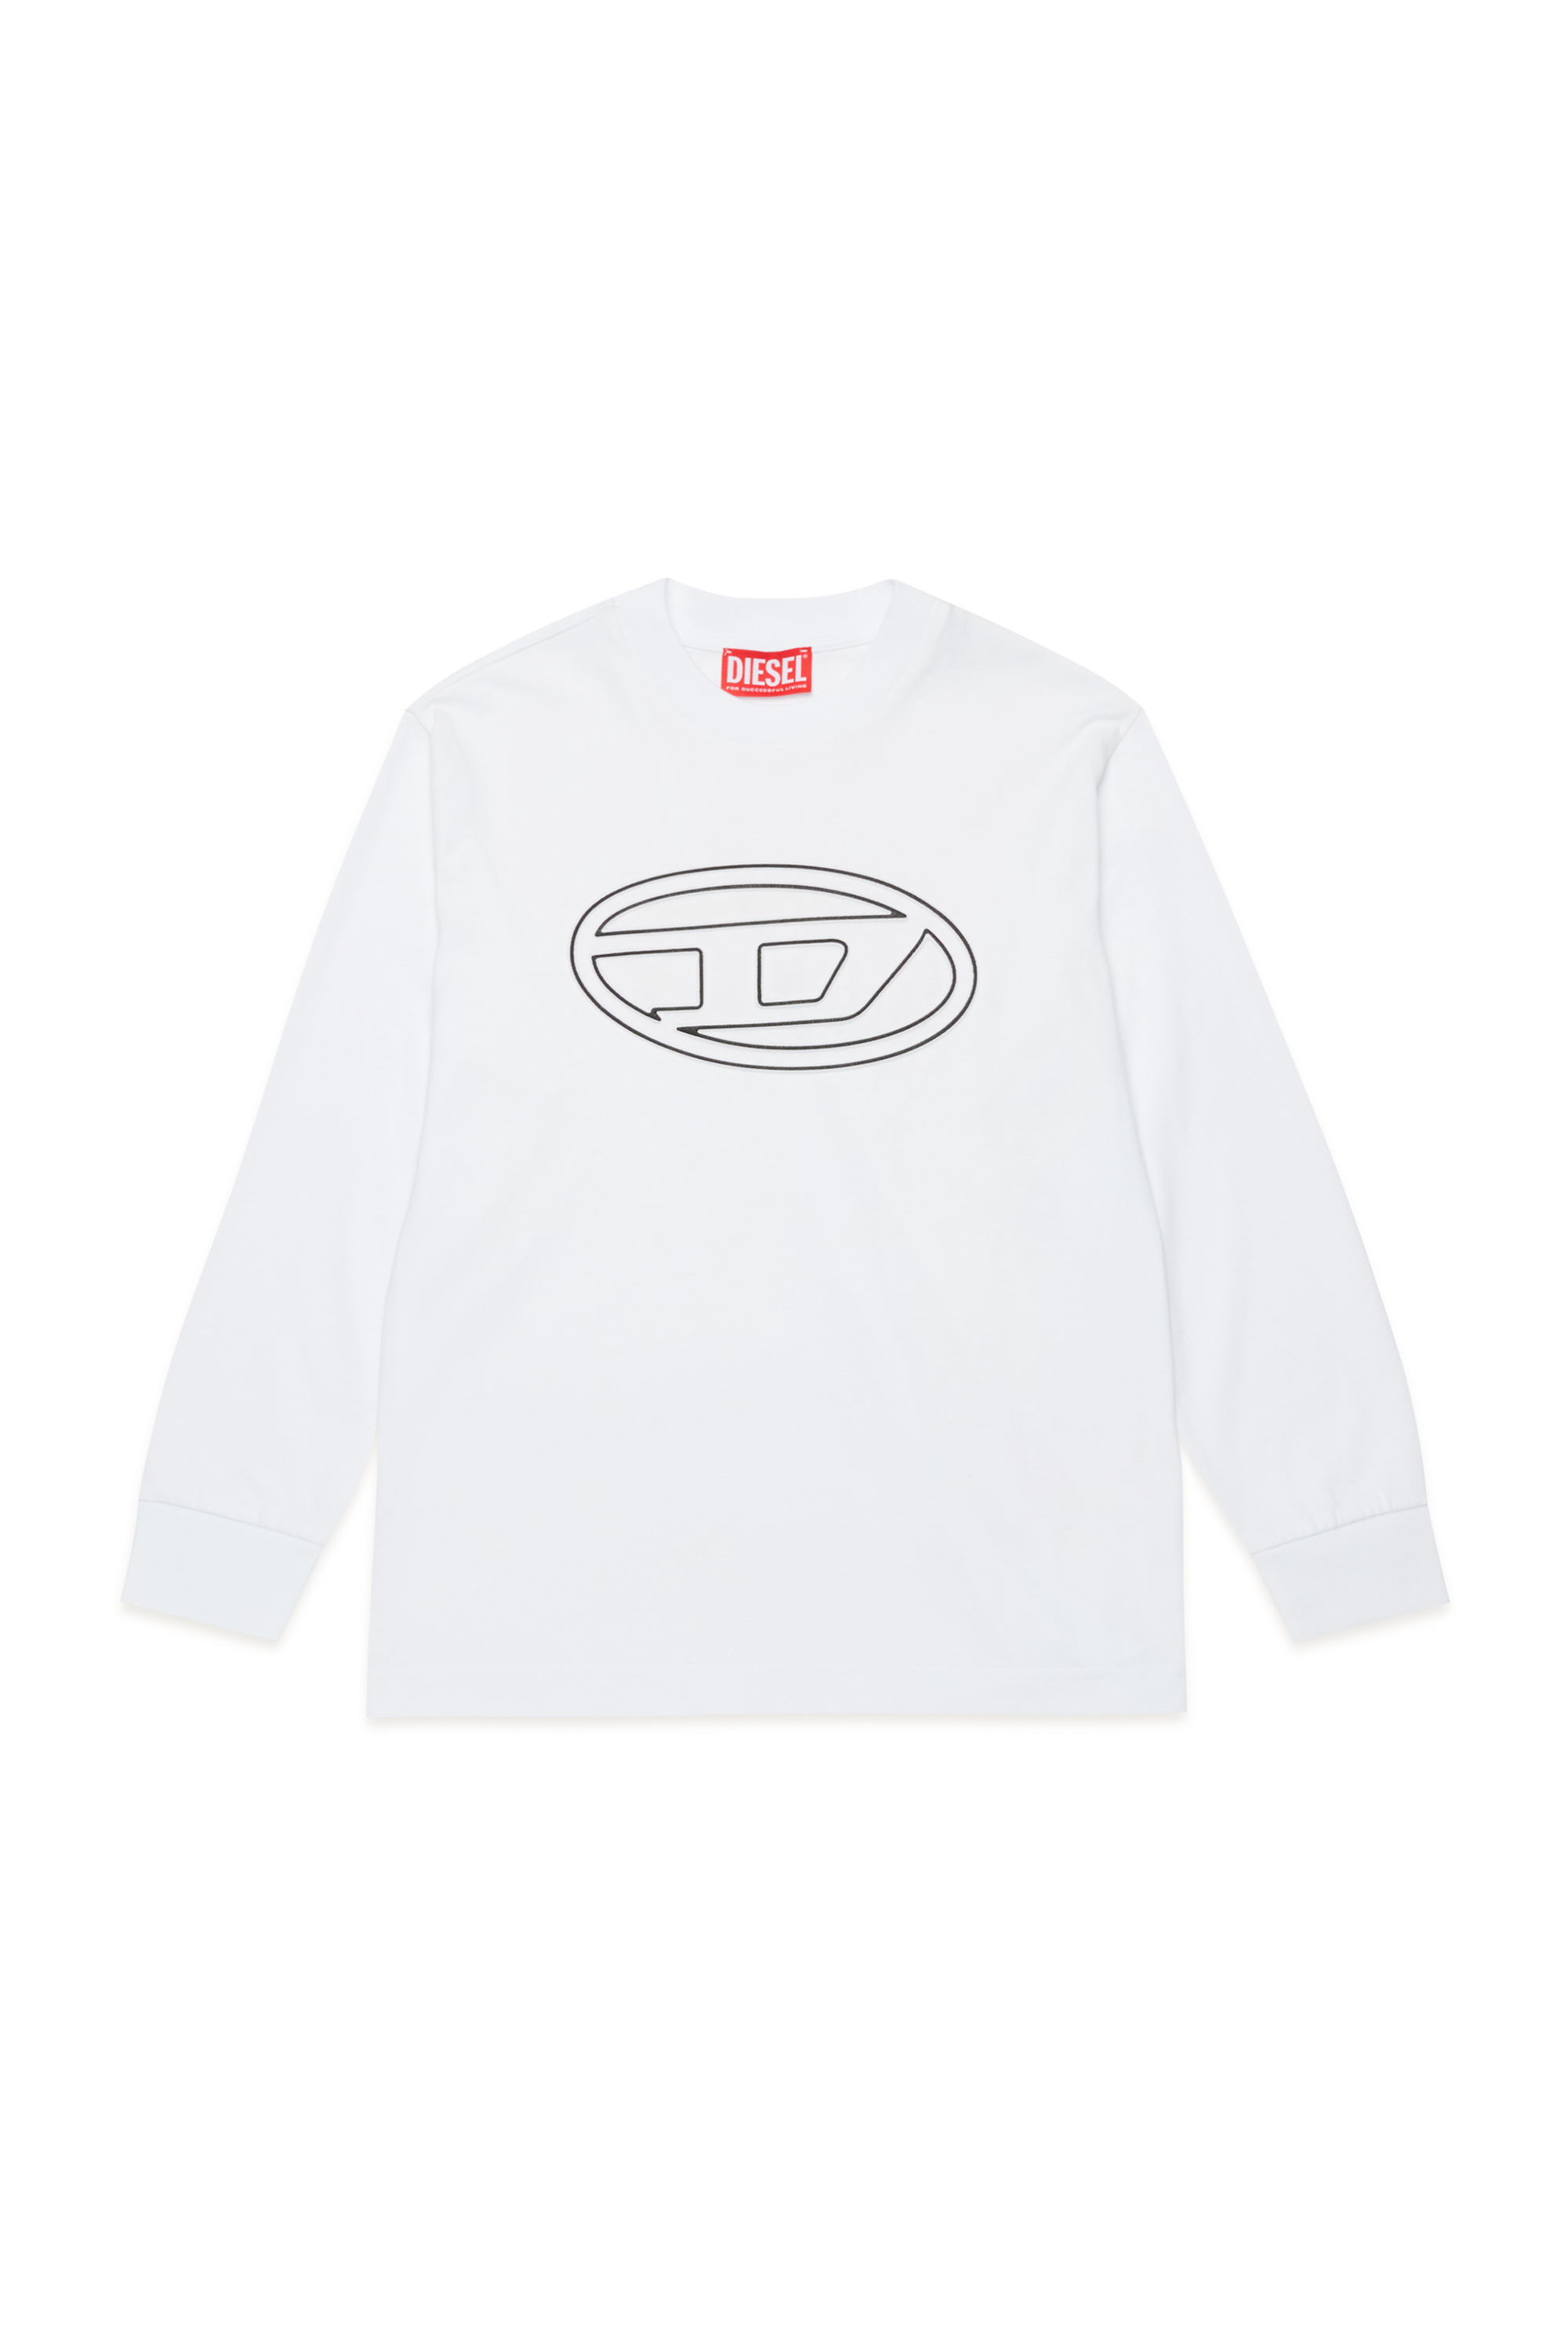 Diesel - TJUSTBIGOVALS OVER, Man Long sleeved t-shirt with large oval D logo in White - Image 1